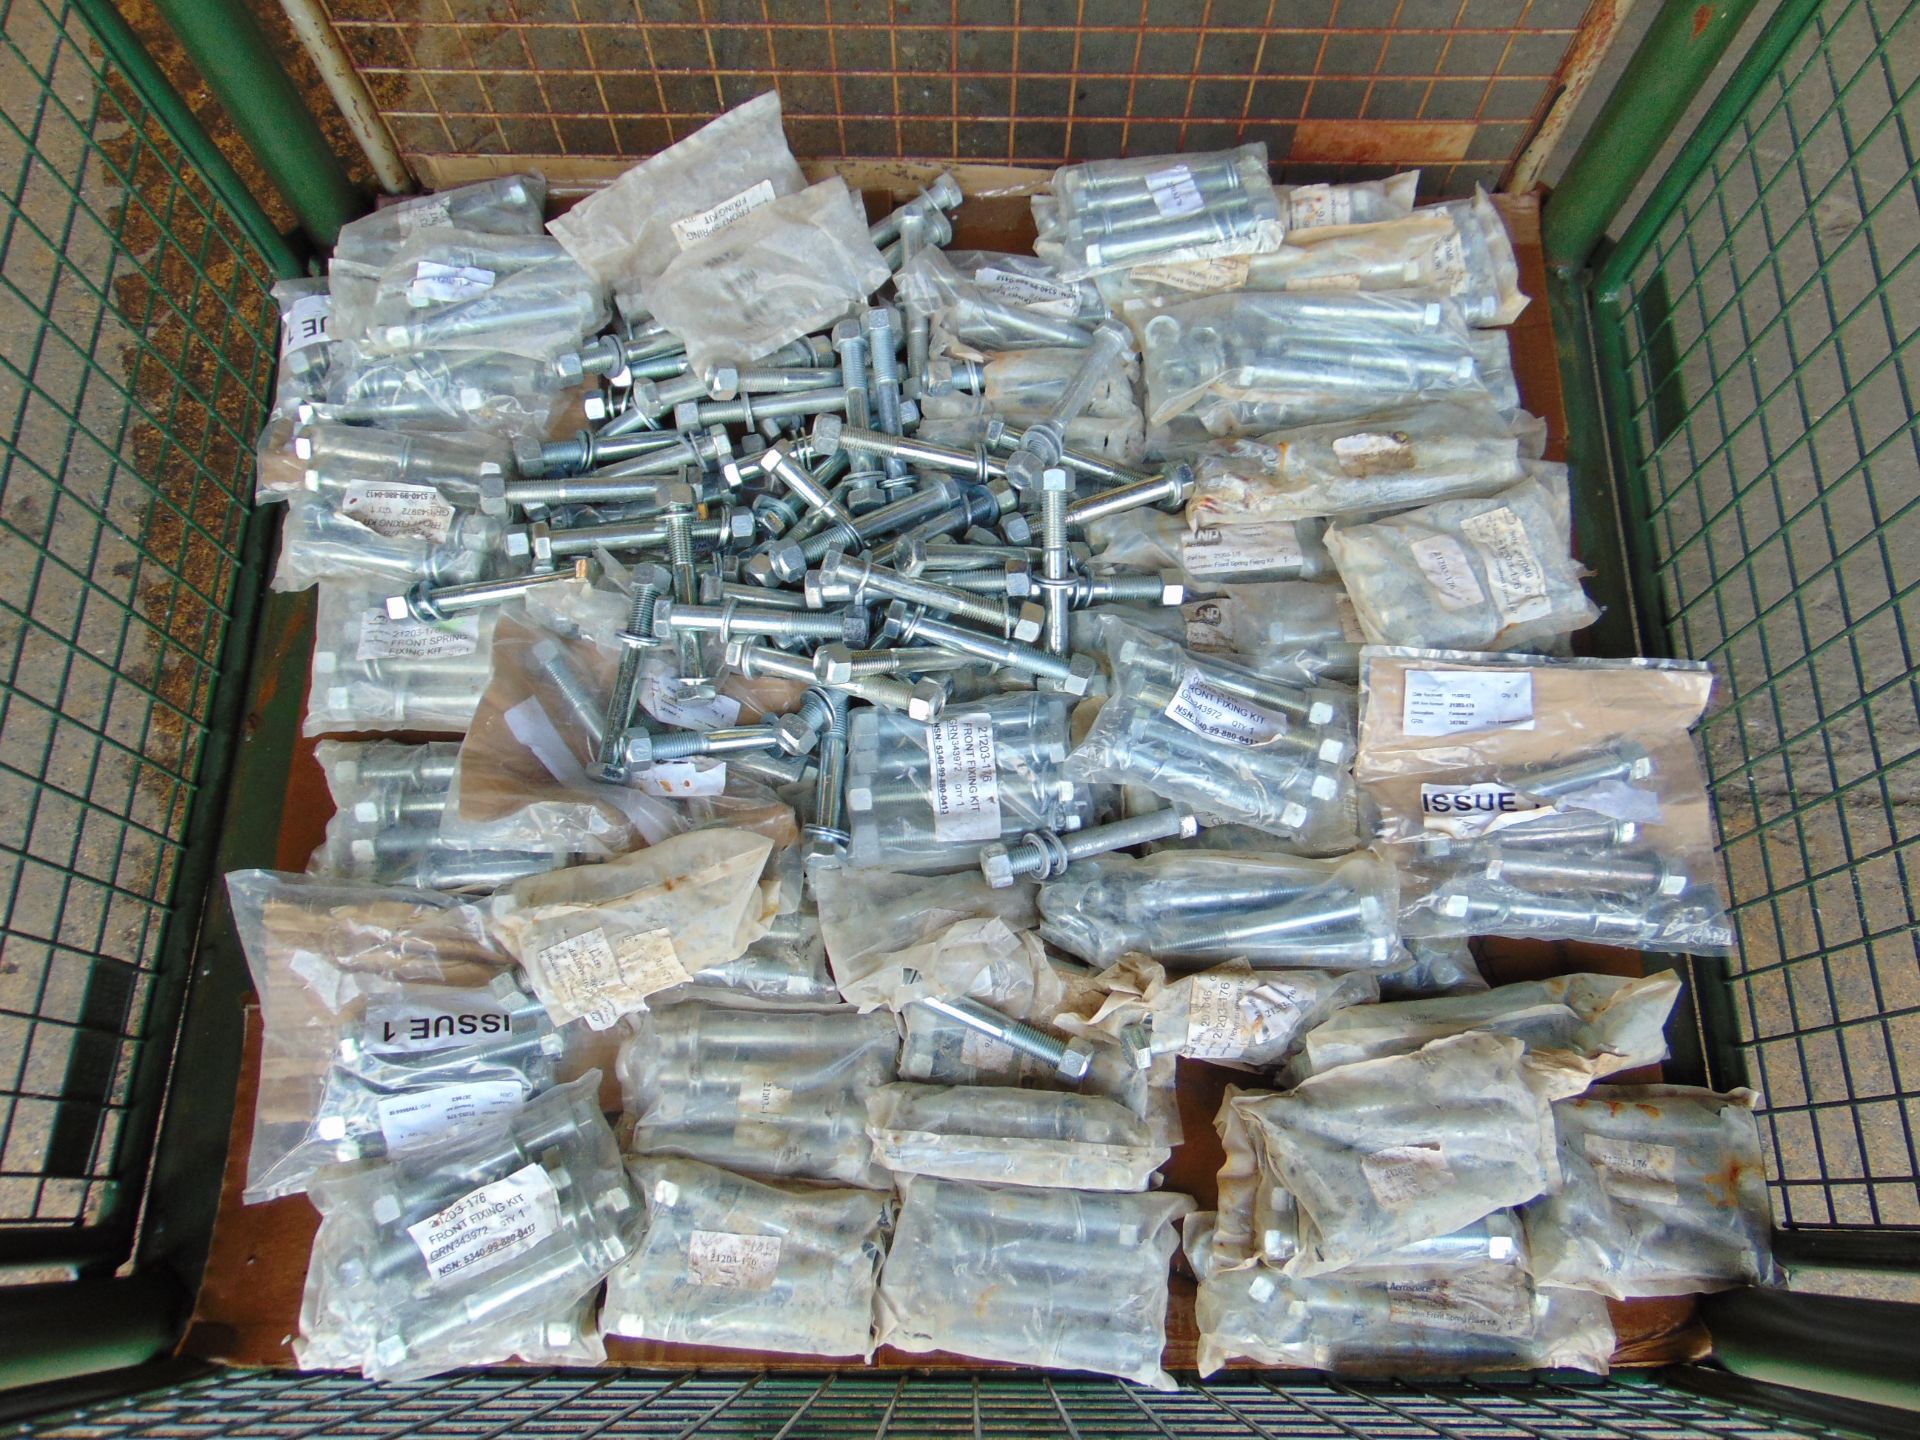 Approx. 250 M20 x 150 Grade 8.8 Bolts, Washers & Nuts - Image 2 of 4